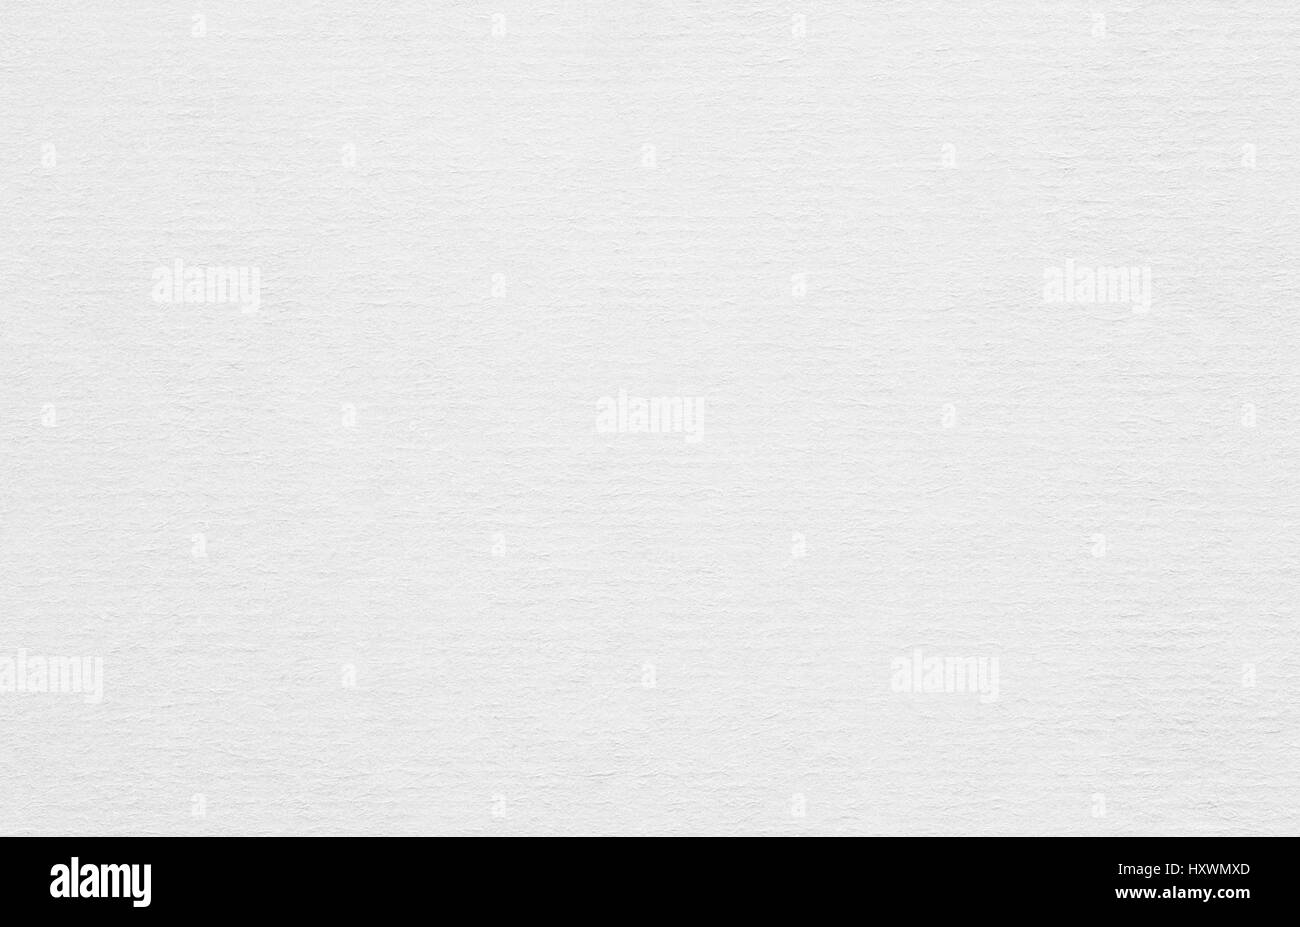 Clean horizontal recycled white paper texture or background Stock Photo